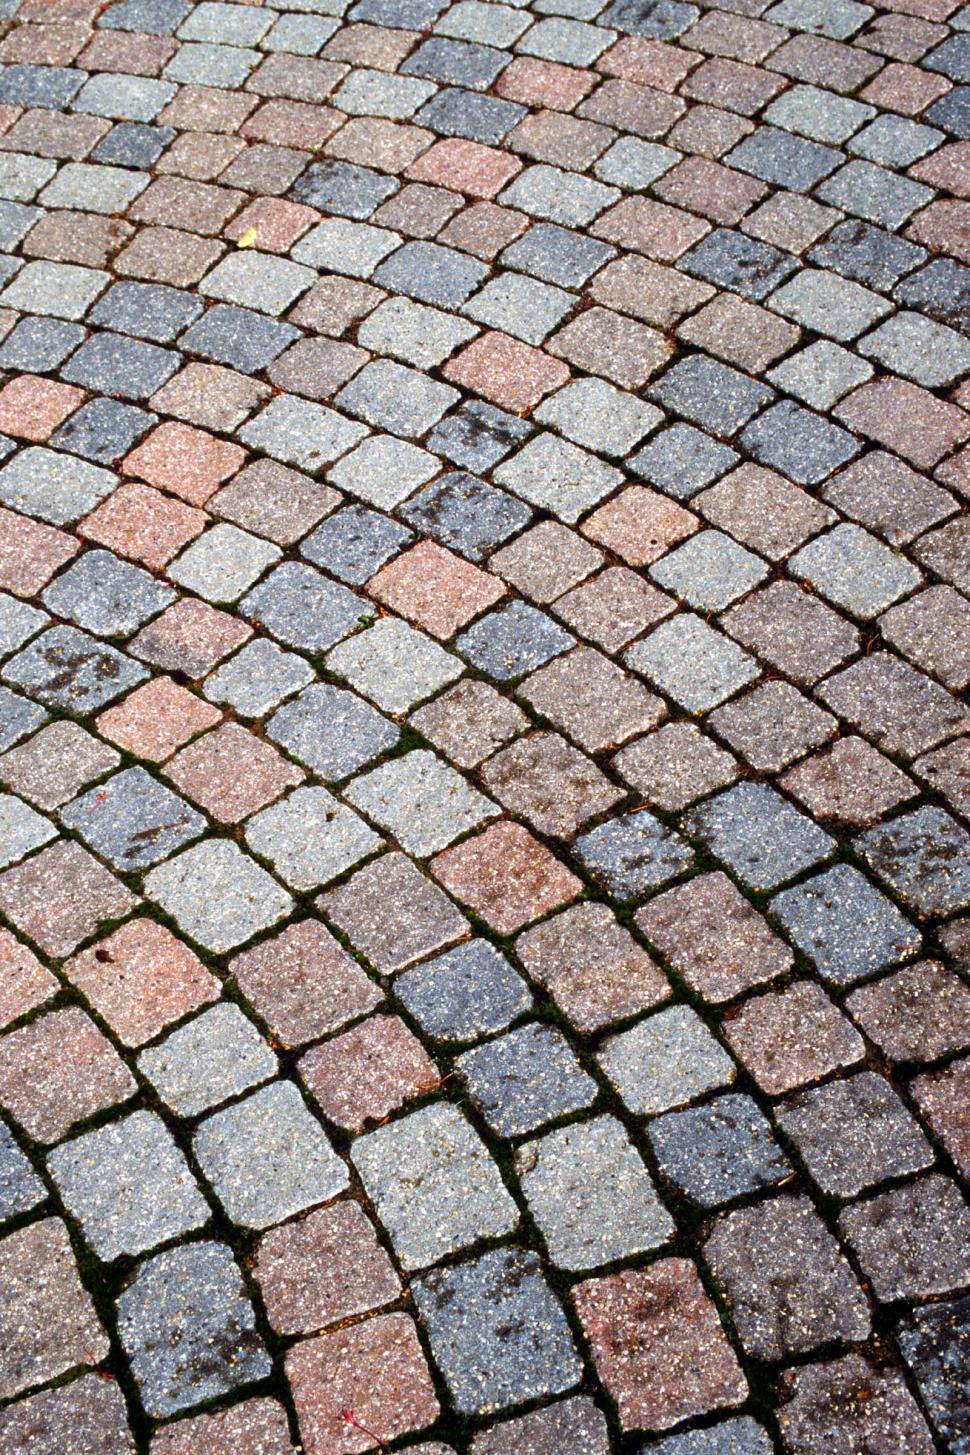 Free Image of cobblestones bricks pavers radial arranged patters masonry textures backgrounds mossy stones blocks curves curved patio walkway 